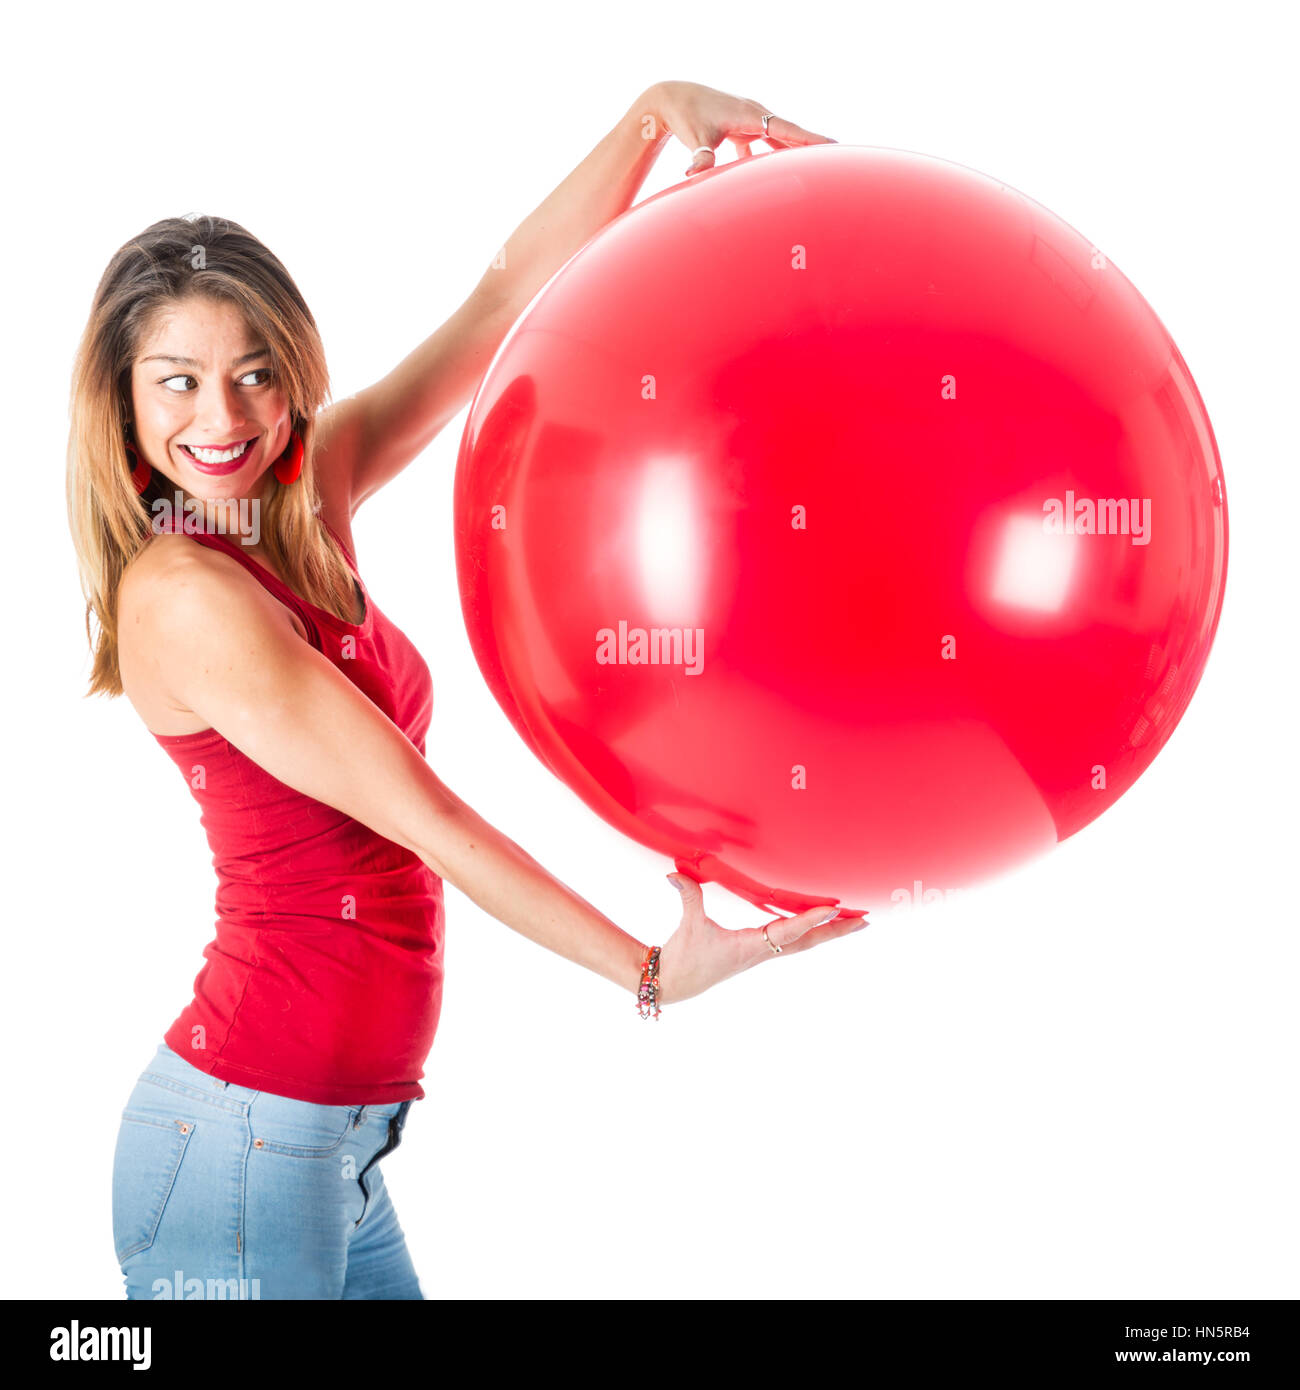 A giant helium balloon Cut Out Stock Images & Pictures - Alamy